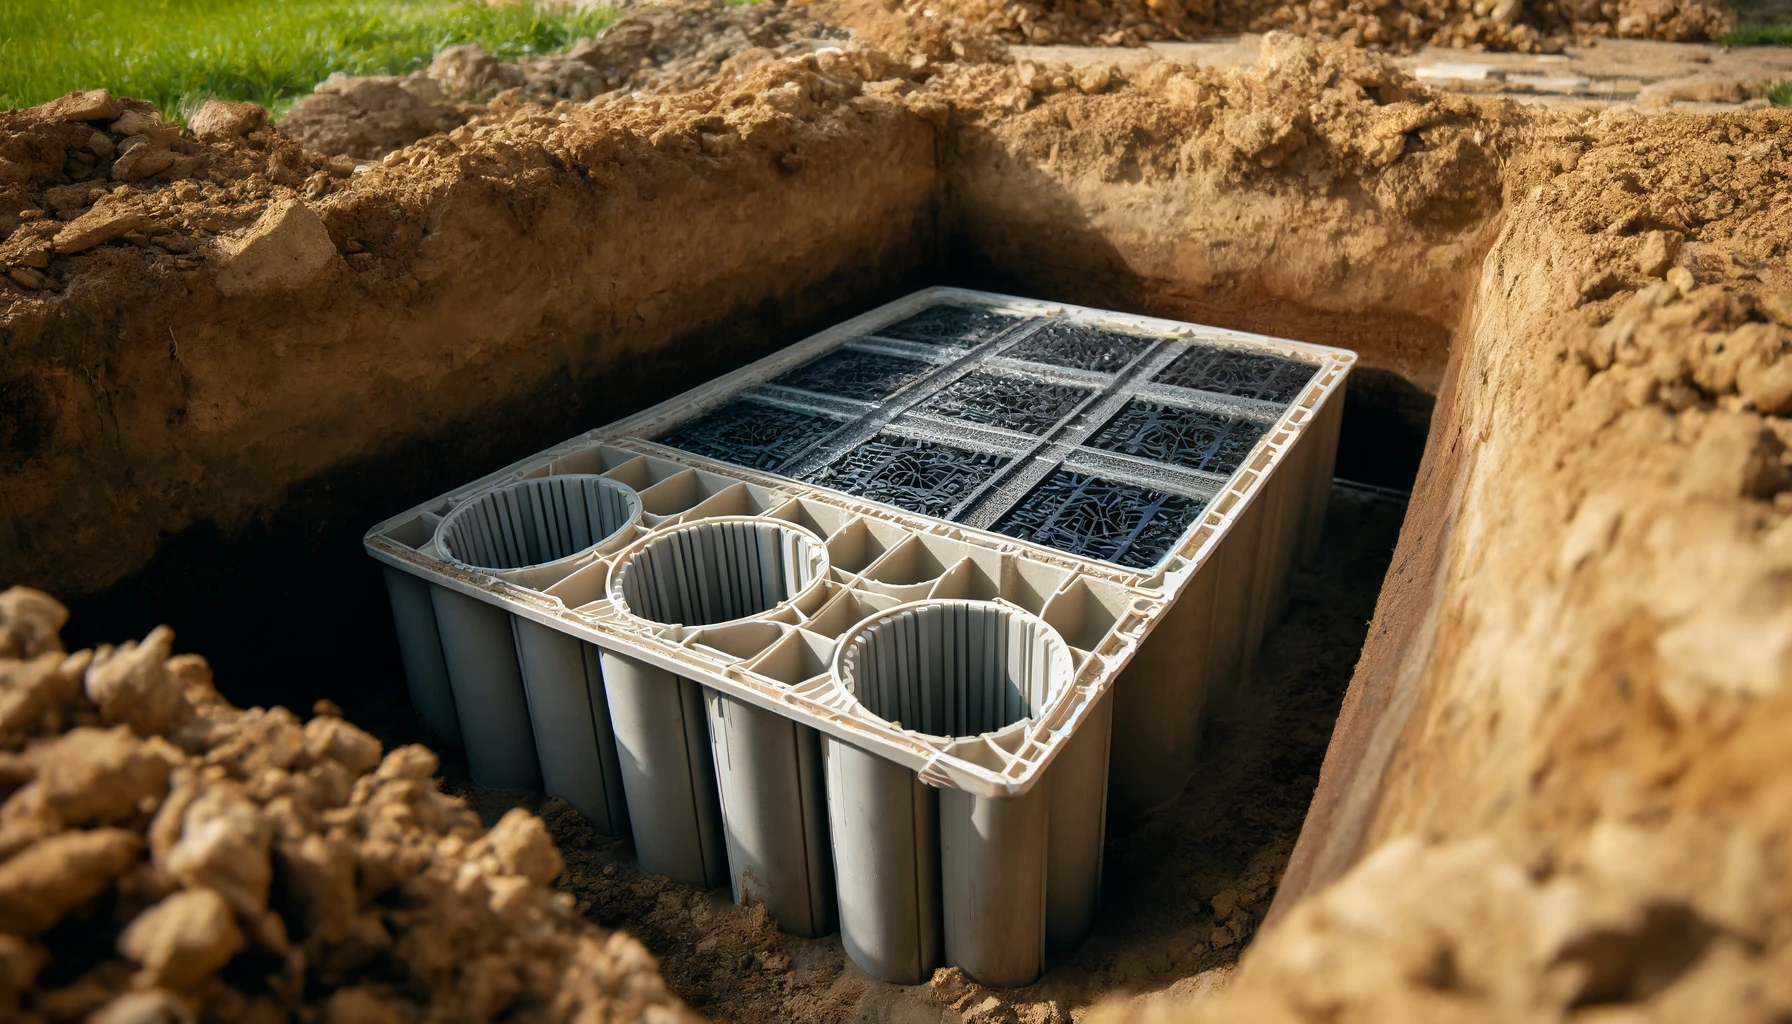 Close-up view of infiltrator panels in a septic system installation, highlighting the durable plastic chambers and surrounding soil.